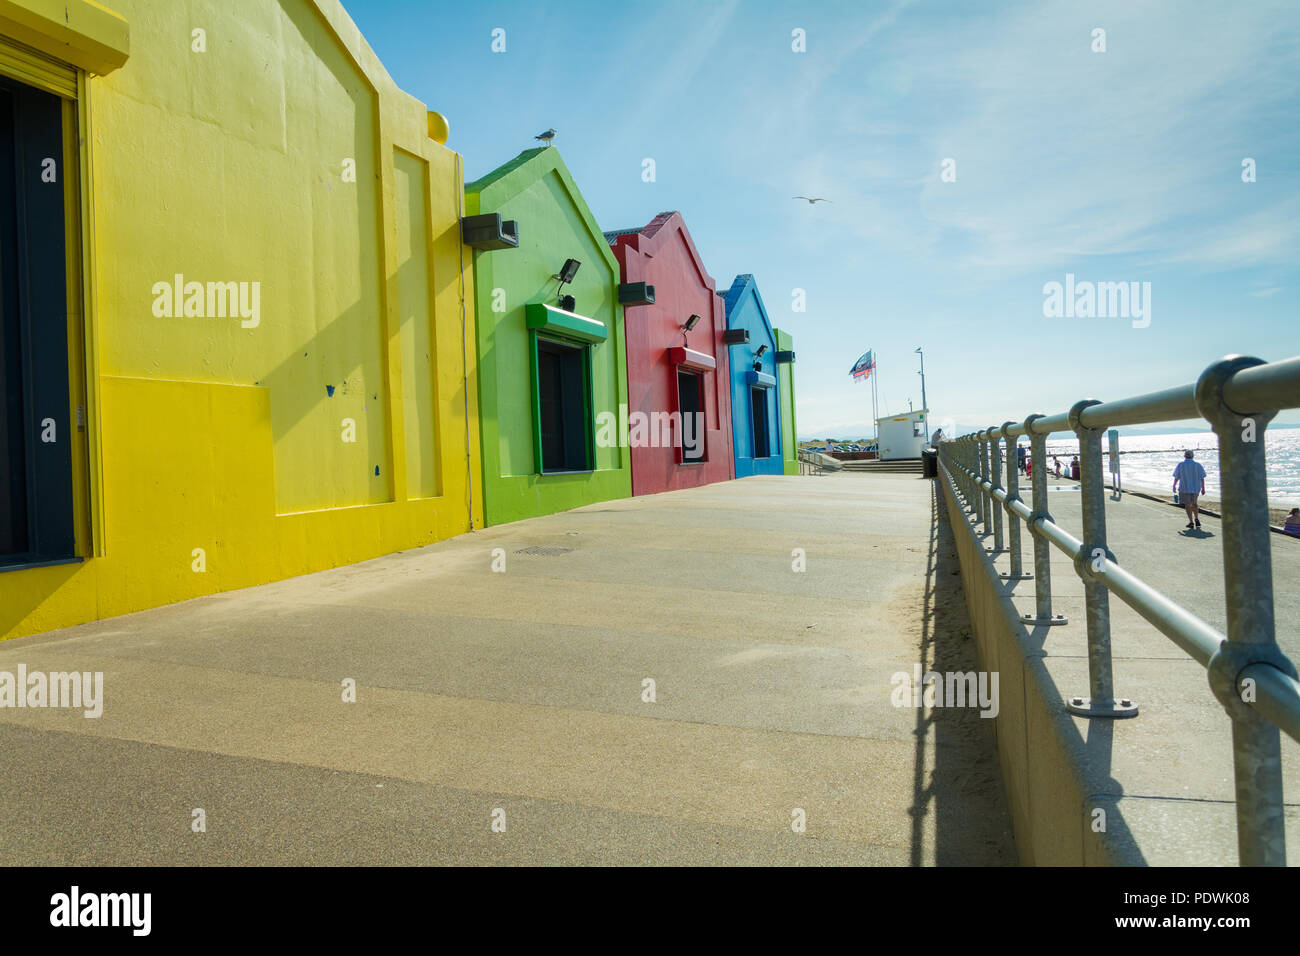 The colourful facilities along Central Beach Promenade in Prestatyn, North Wales, UK. Taken during the summer heatwave, 2018. Good for tourism topics Stock Photo